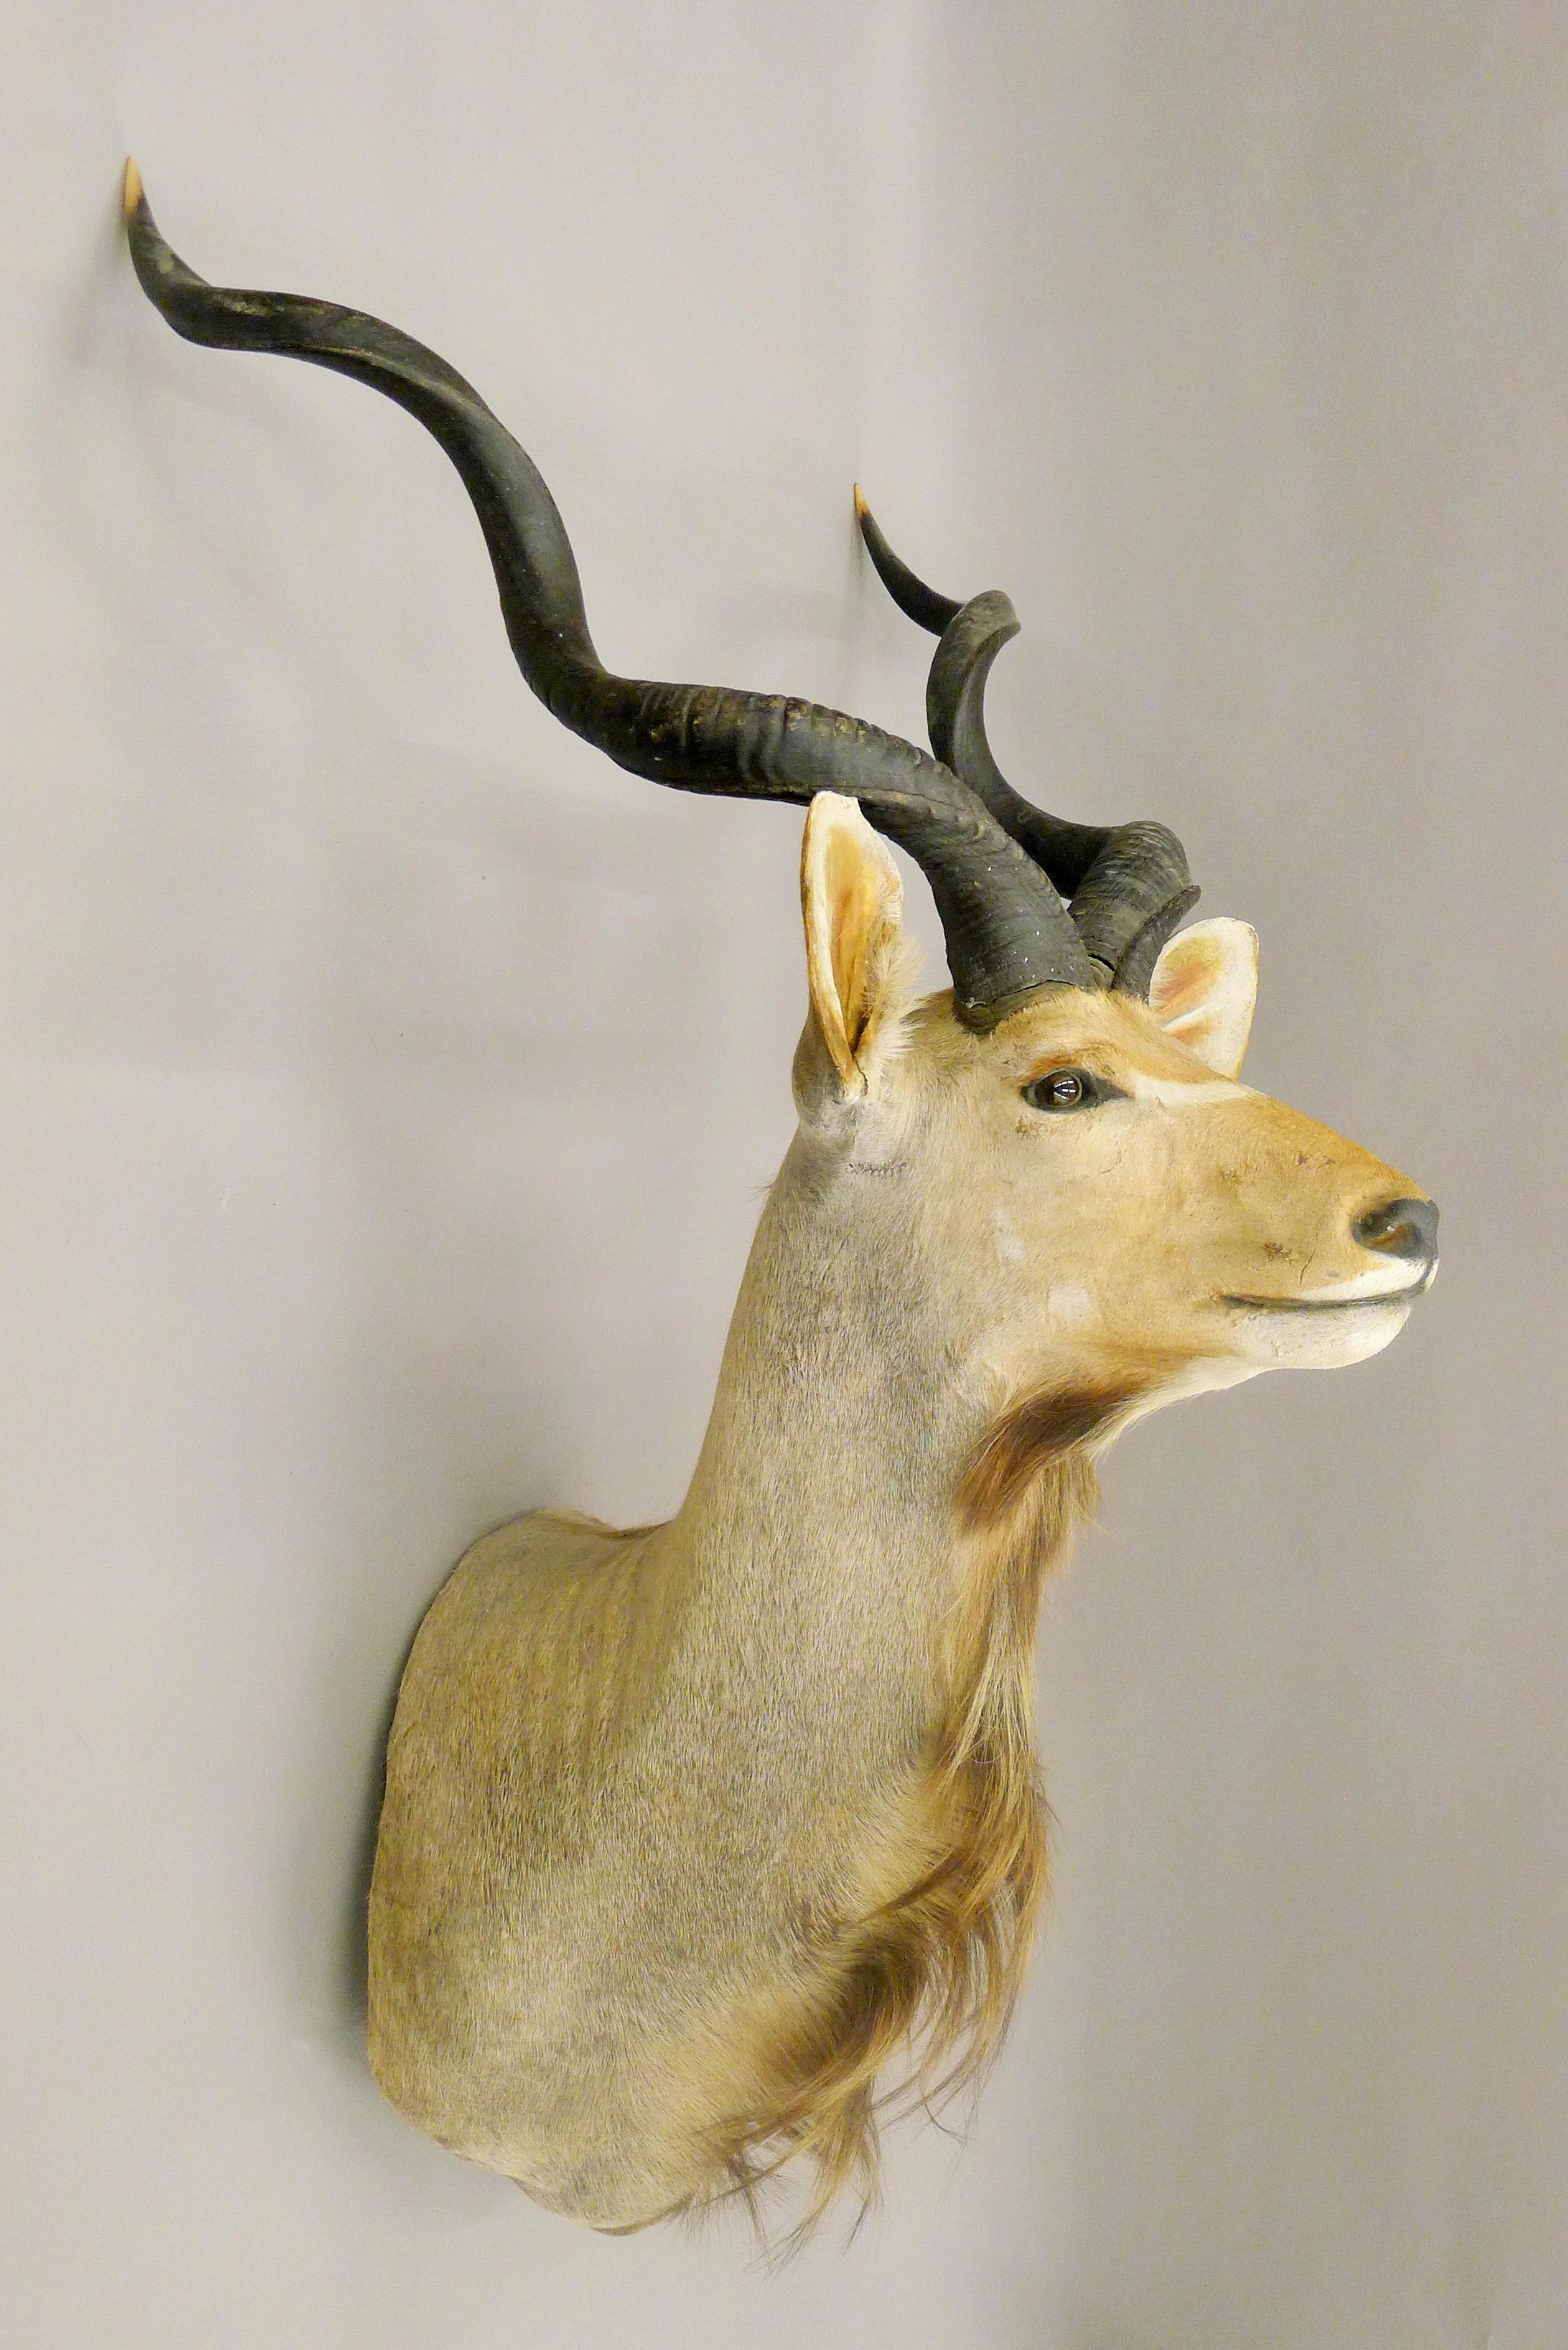 A taxidermy specimen of a Kudu head and horns Tragelaphus imberbis.